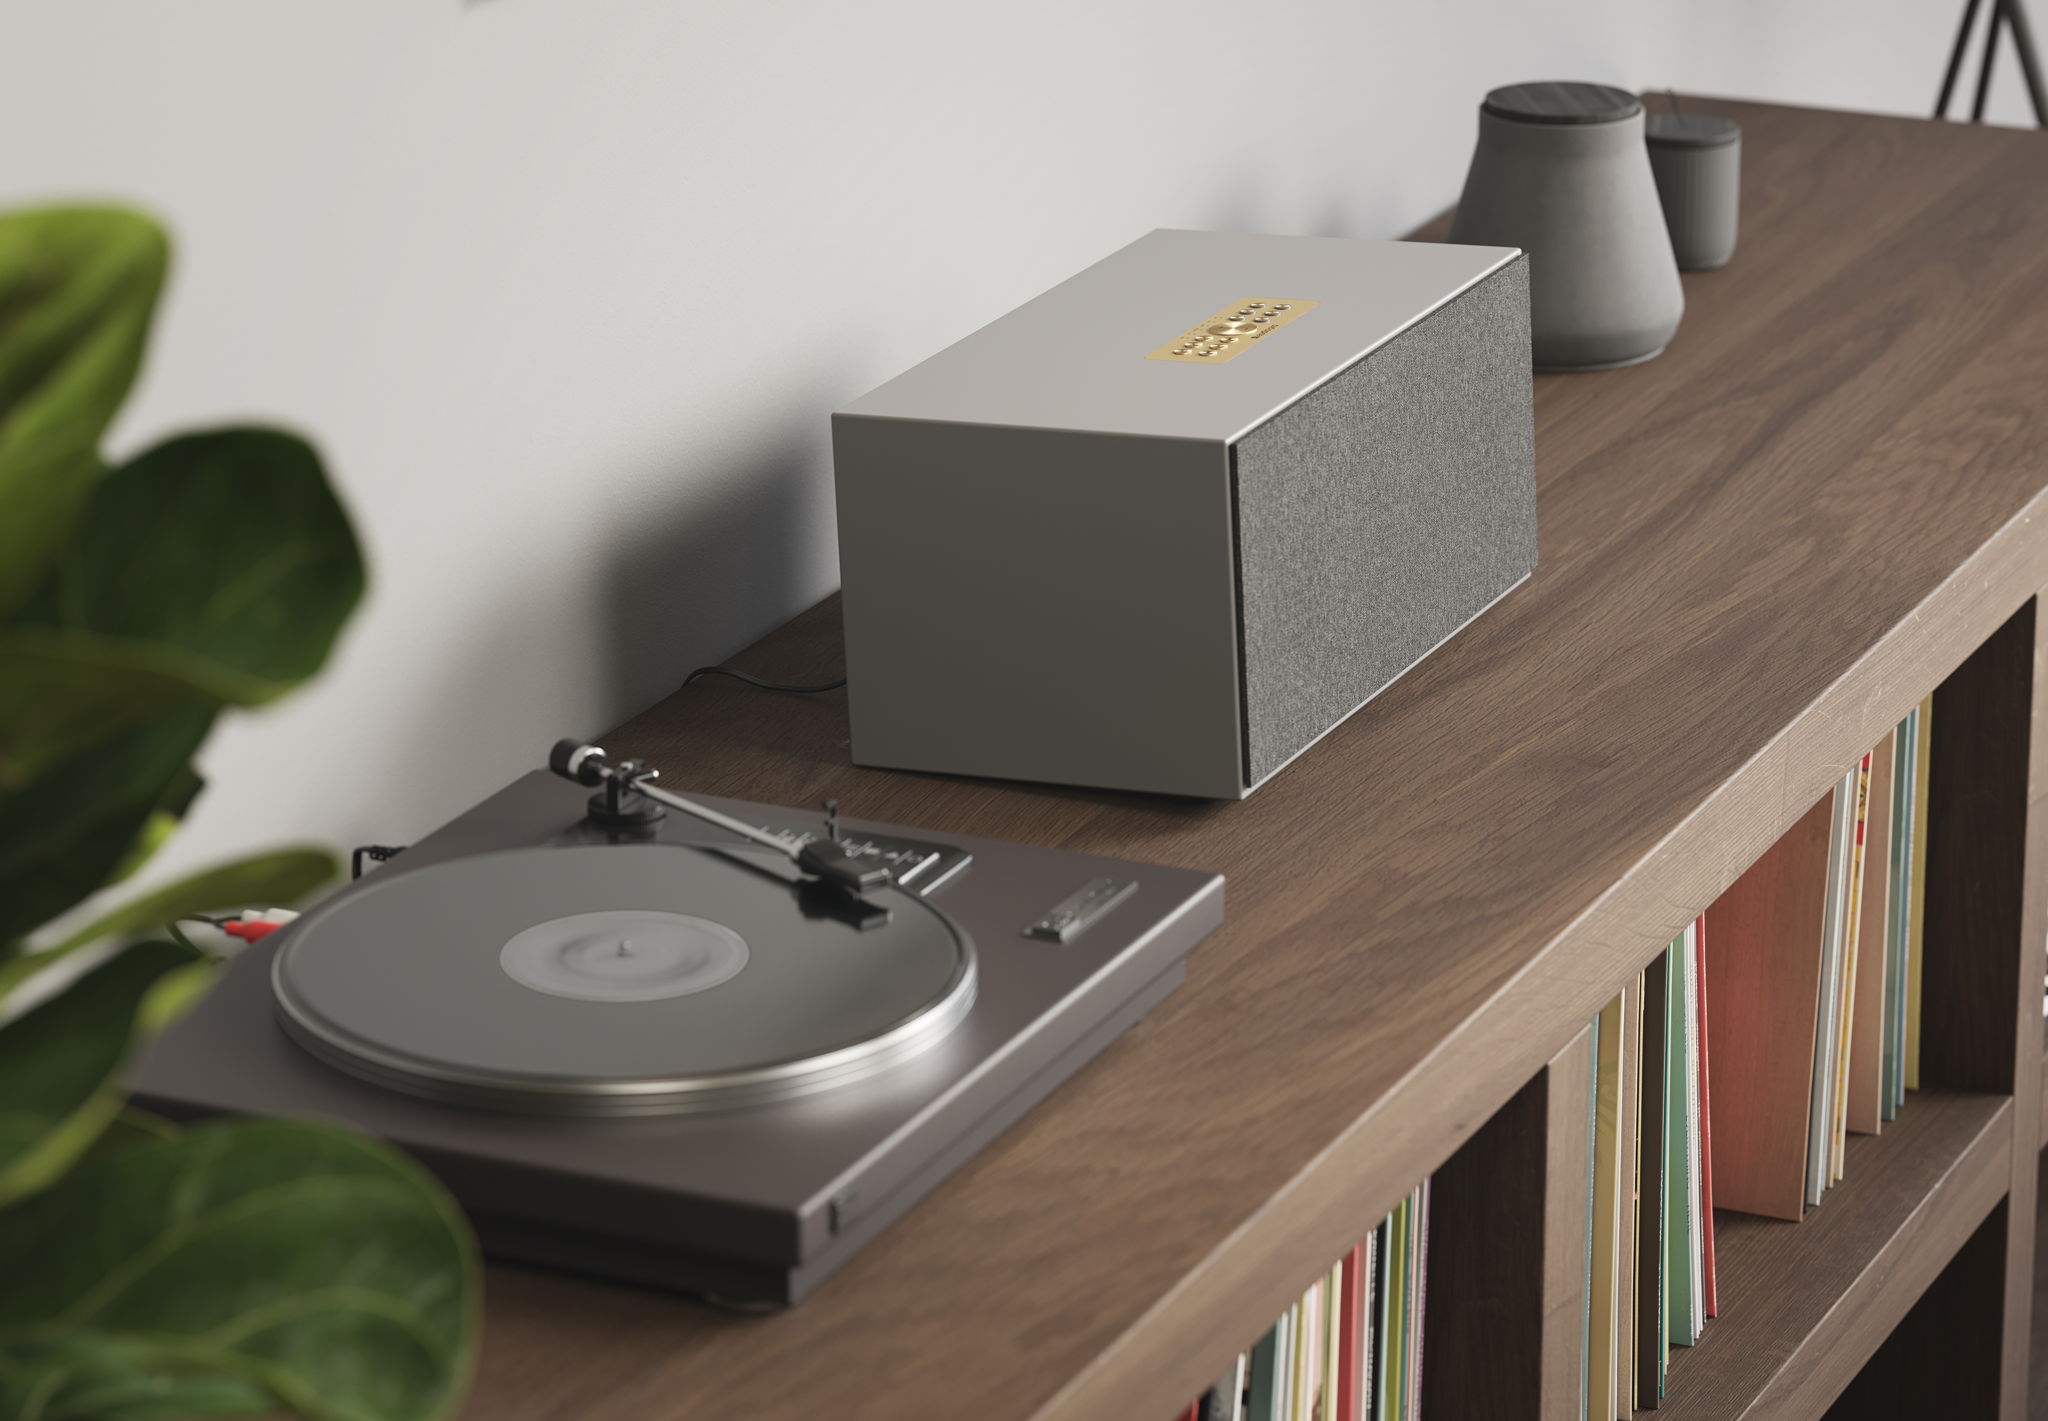 Your turntable can be connected to the Audio Pro C20, thanks to the built-in MM phonostage.